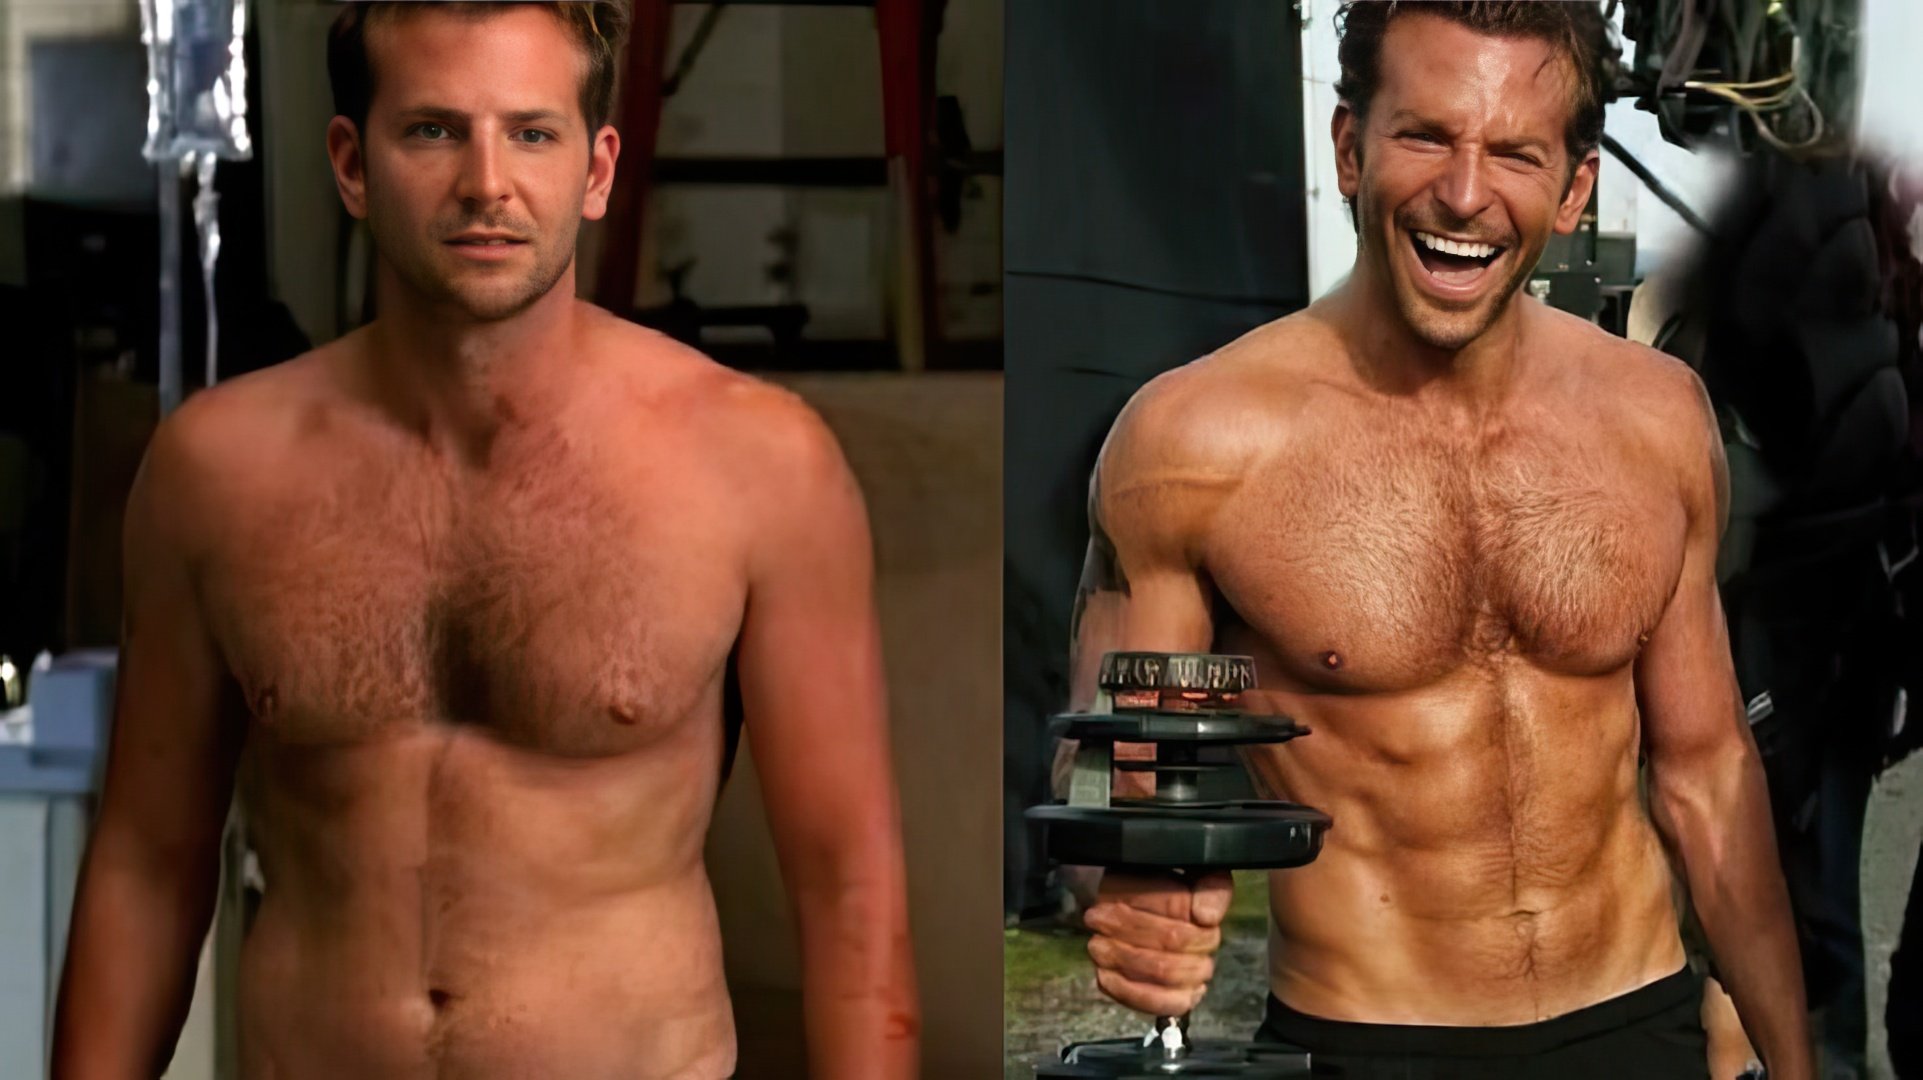 To play Faceman, Bradley Cooper got in shape